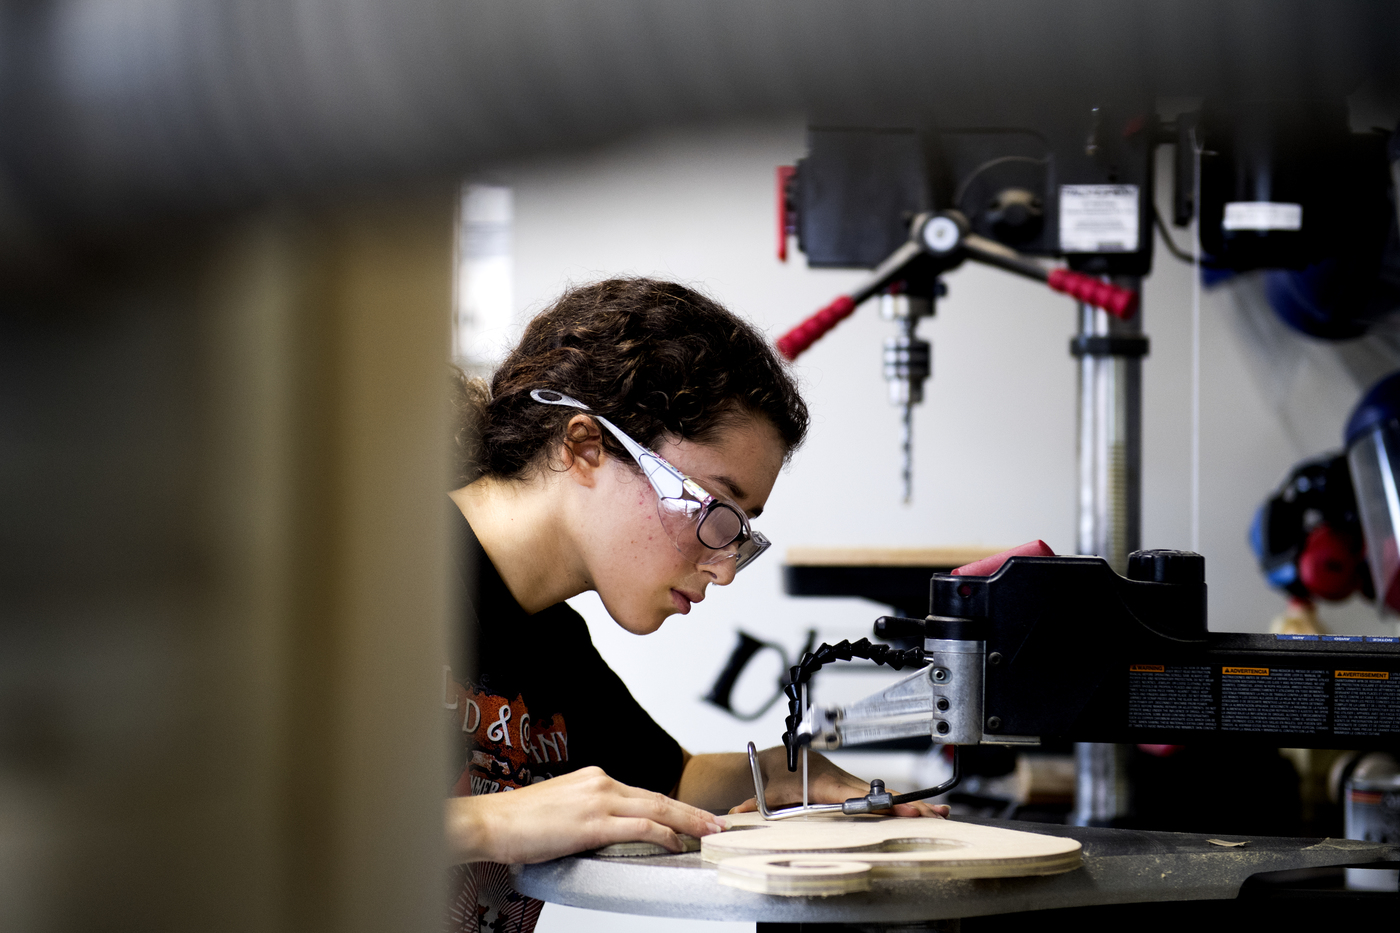 Student wearing safety glasses engages with woodworking equipment at a wood shop 